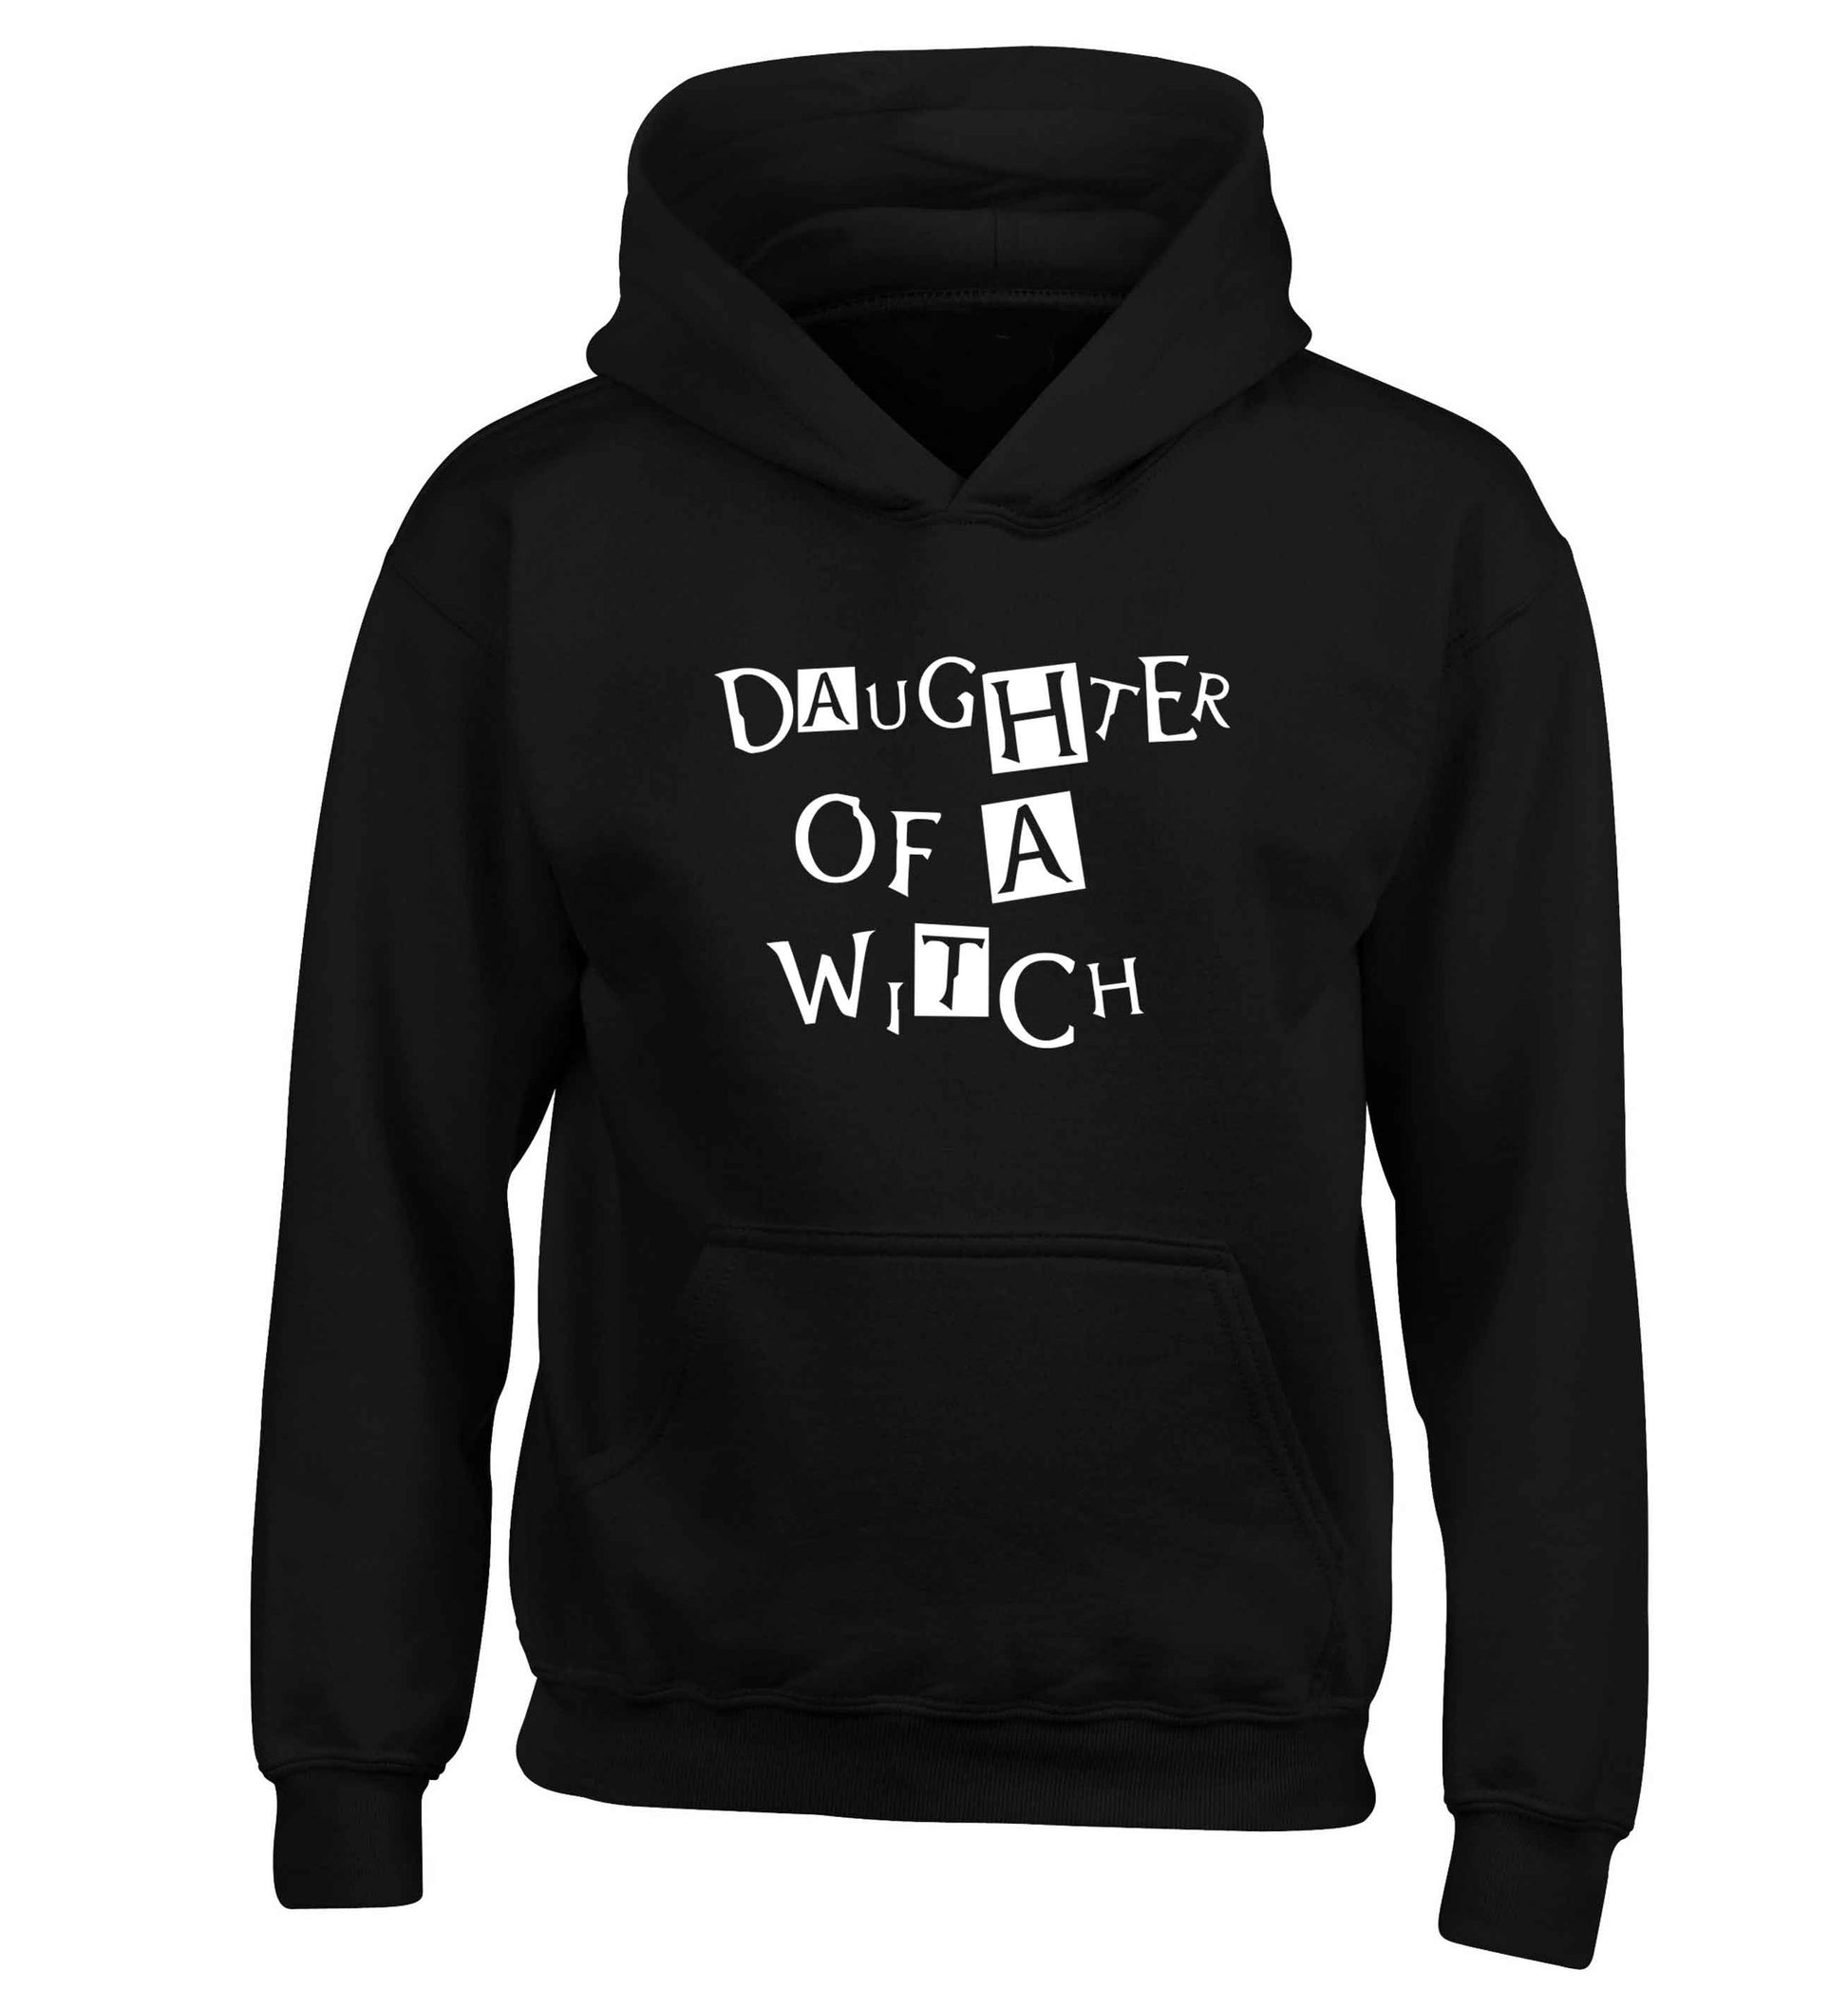 Daughter of a witch children's black hoodie 12-13 Years